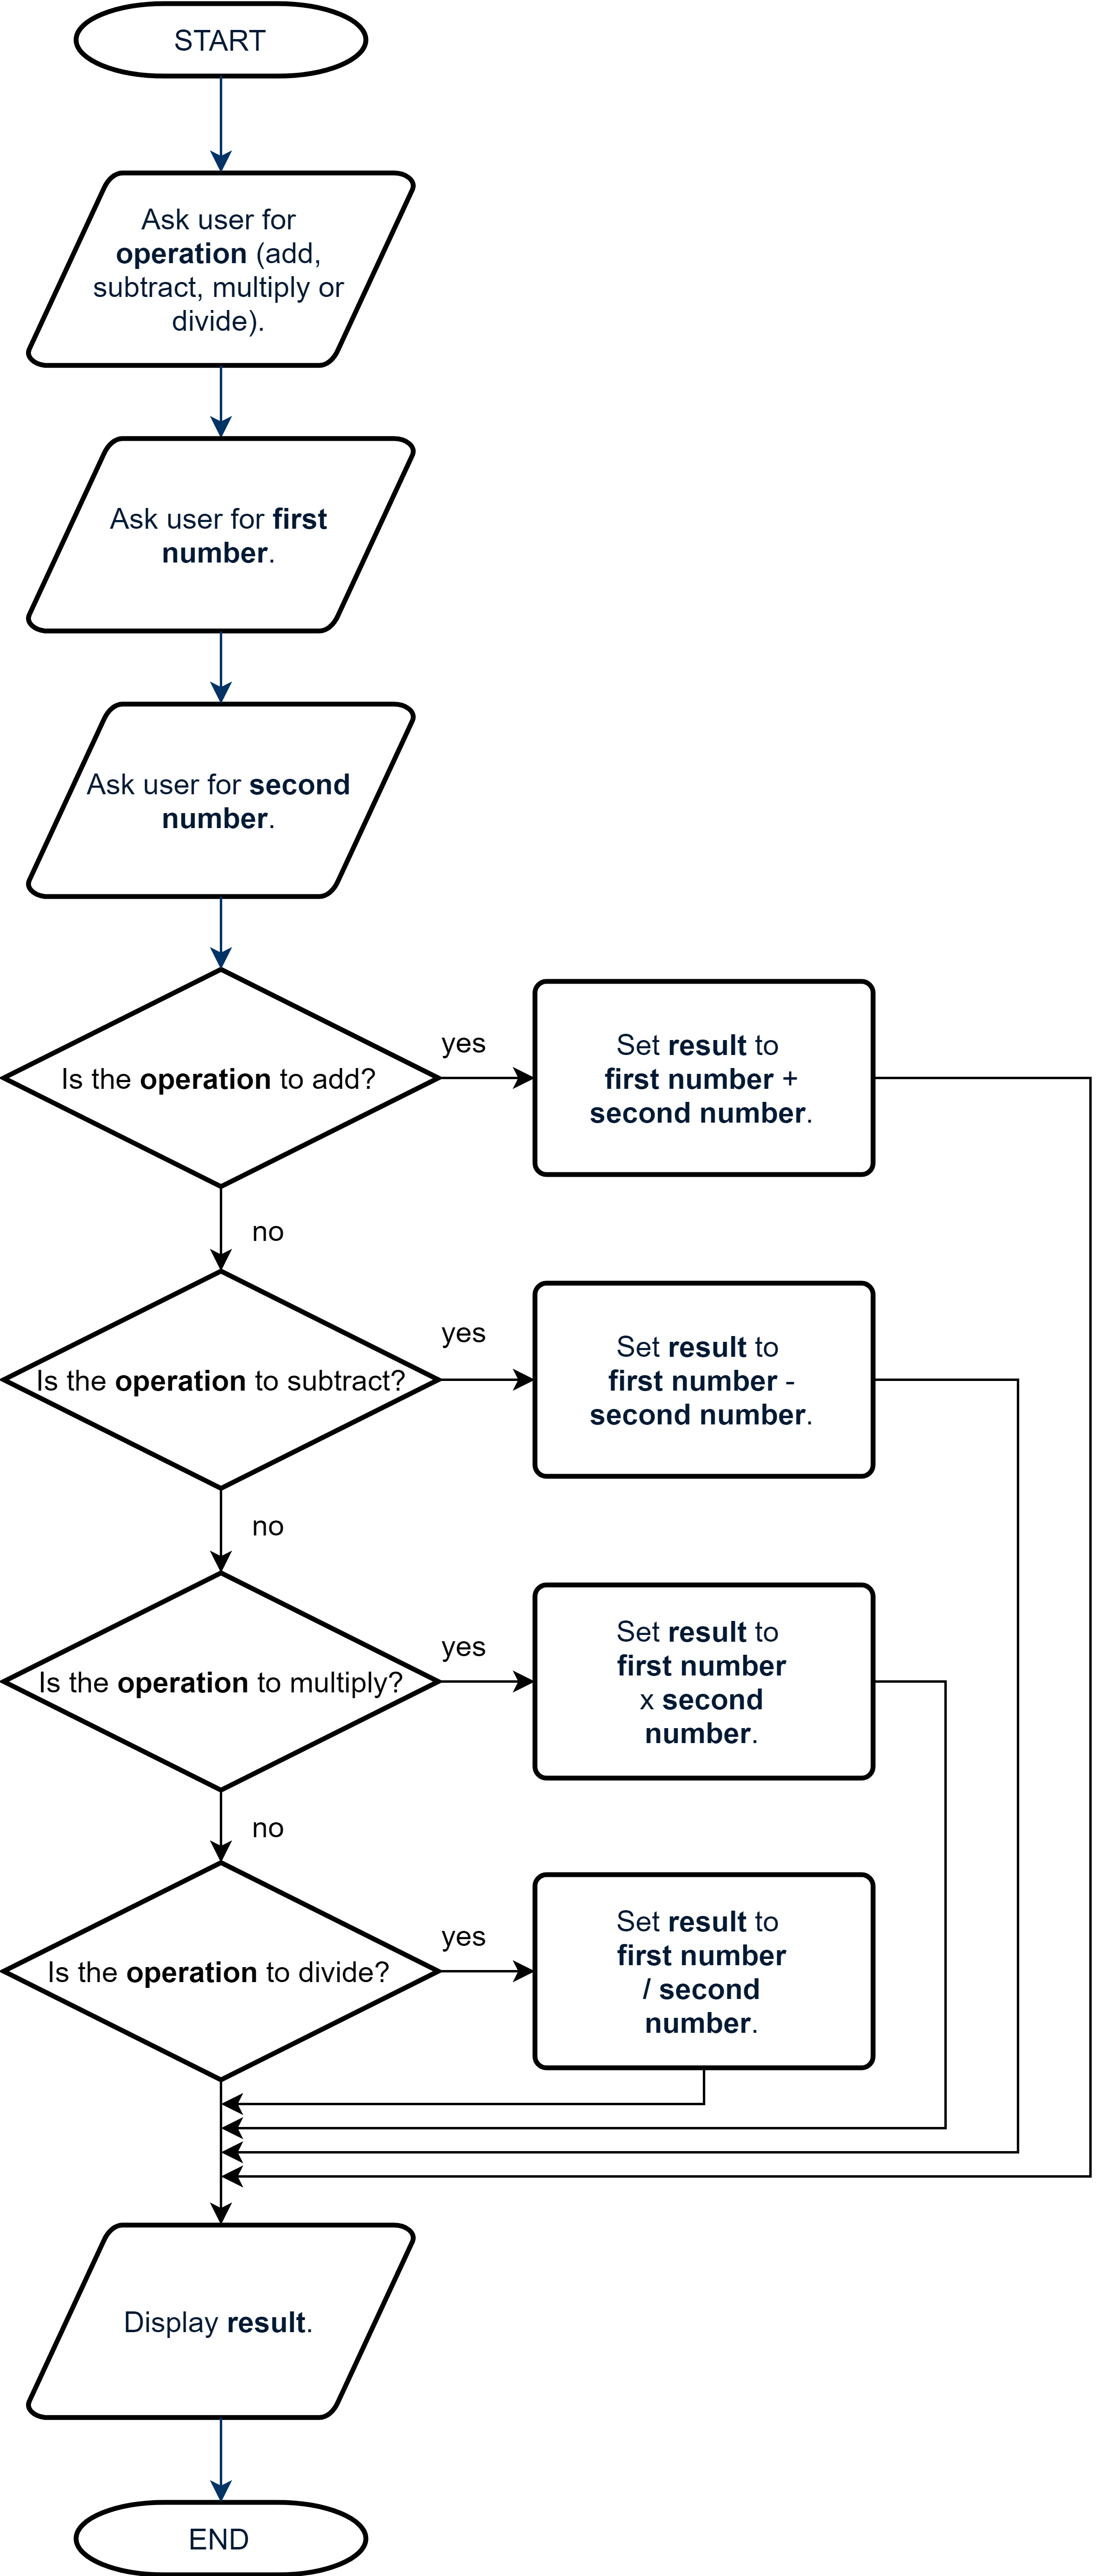 Flow chart for calculator: Start, leads to 'ask user for operation (add, subtract, multiply or divide', leads to 'ask user for first number', leads to 'ask user for second number', leads to 'is the operation to add?'. If yes, leads to 'set result to first number plus second number'. If no, leads to 'is the operation to subtract?'. If yes, leads to 'Set result to first number minus second number'. If no, leads to 'Is the operation to multiply?'. If yes, leads to 'set result to first number times second number'. If no, leads to 'Is the operation to divide?'. If yes, leads to 'Set result to first number divided by second number'. All options lead to the command 'display result', which then leads to 'end'.